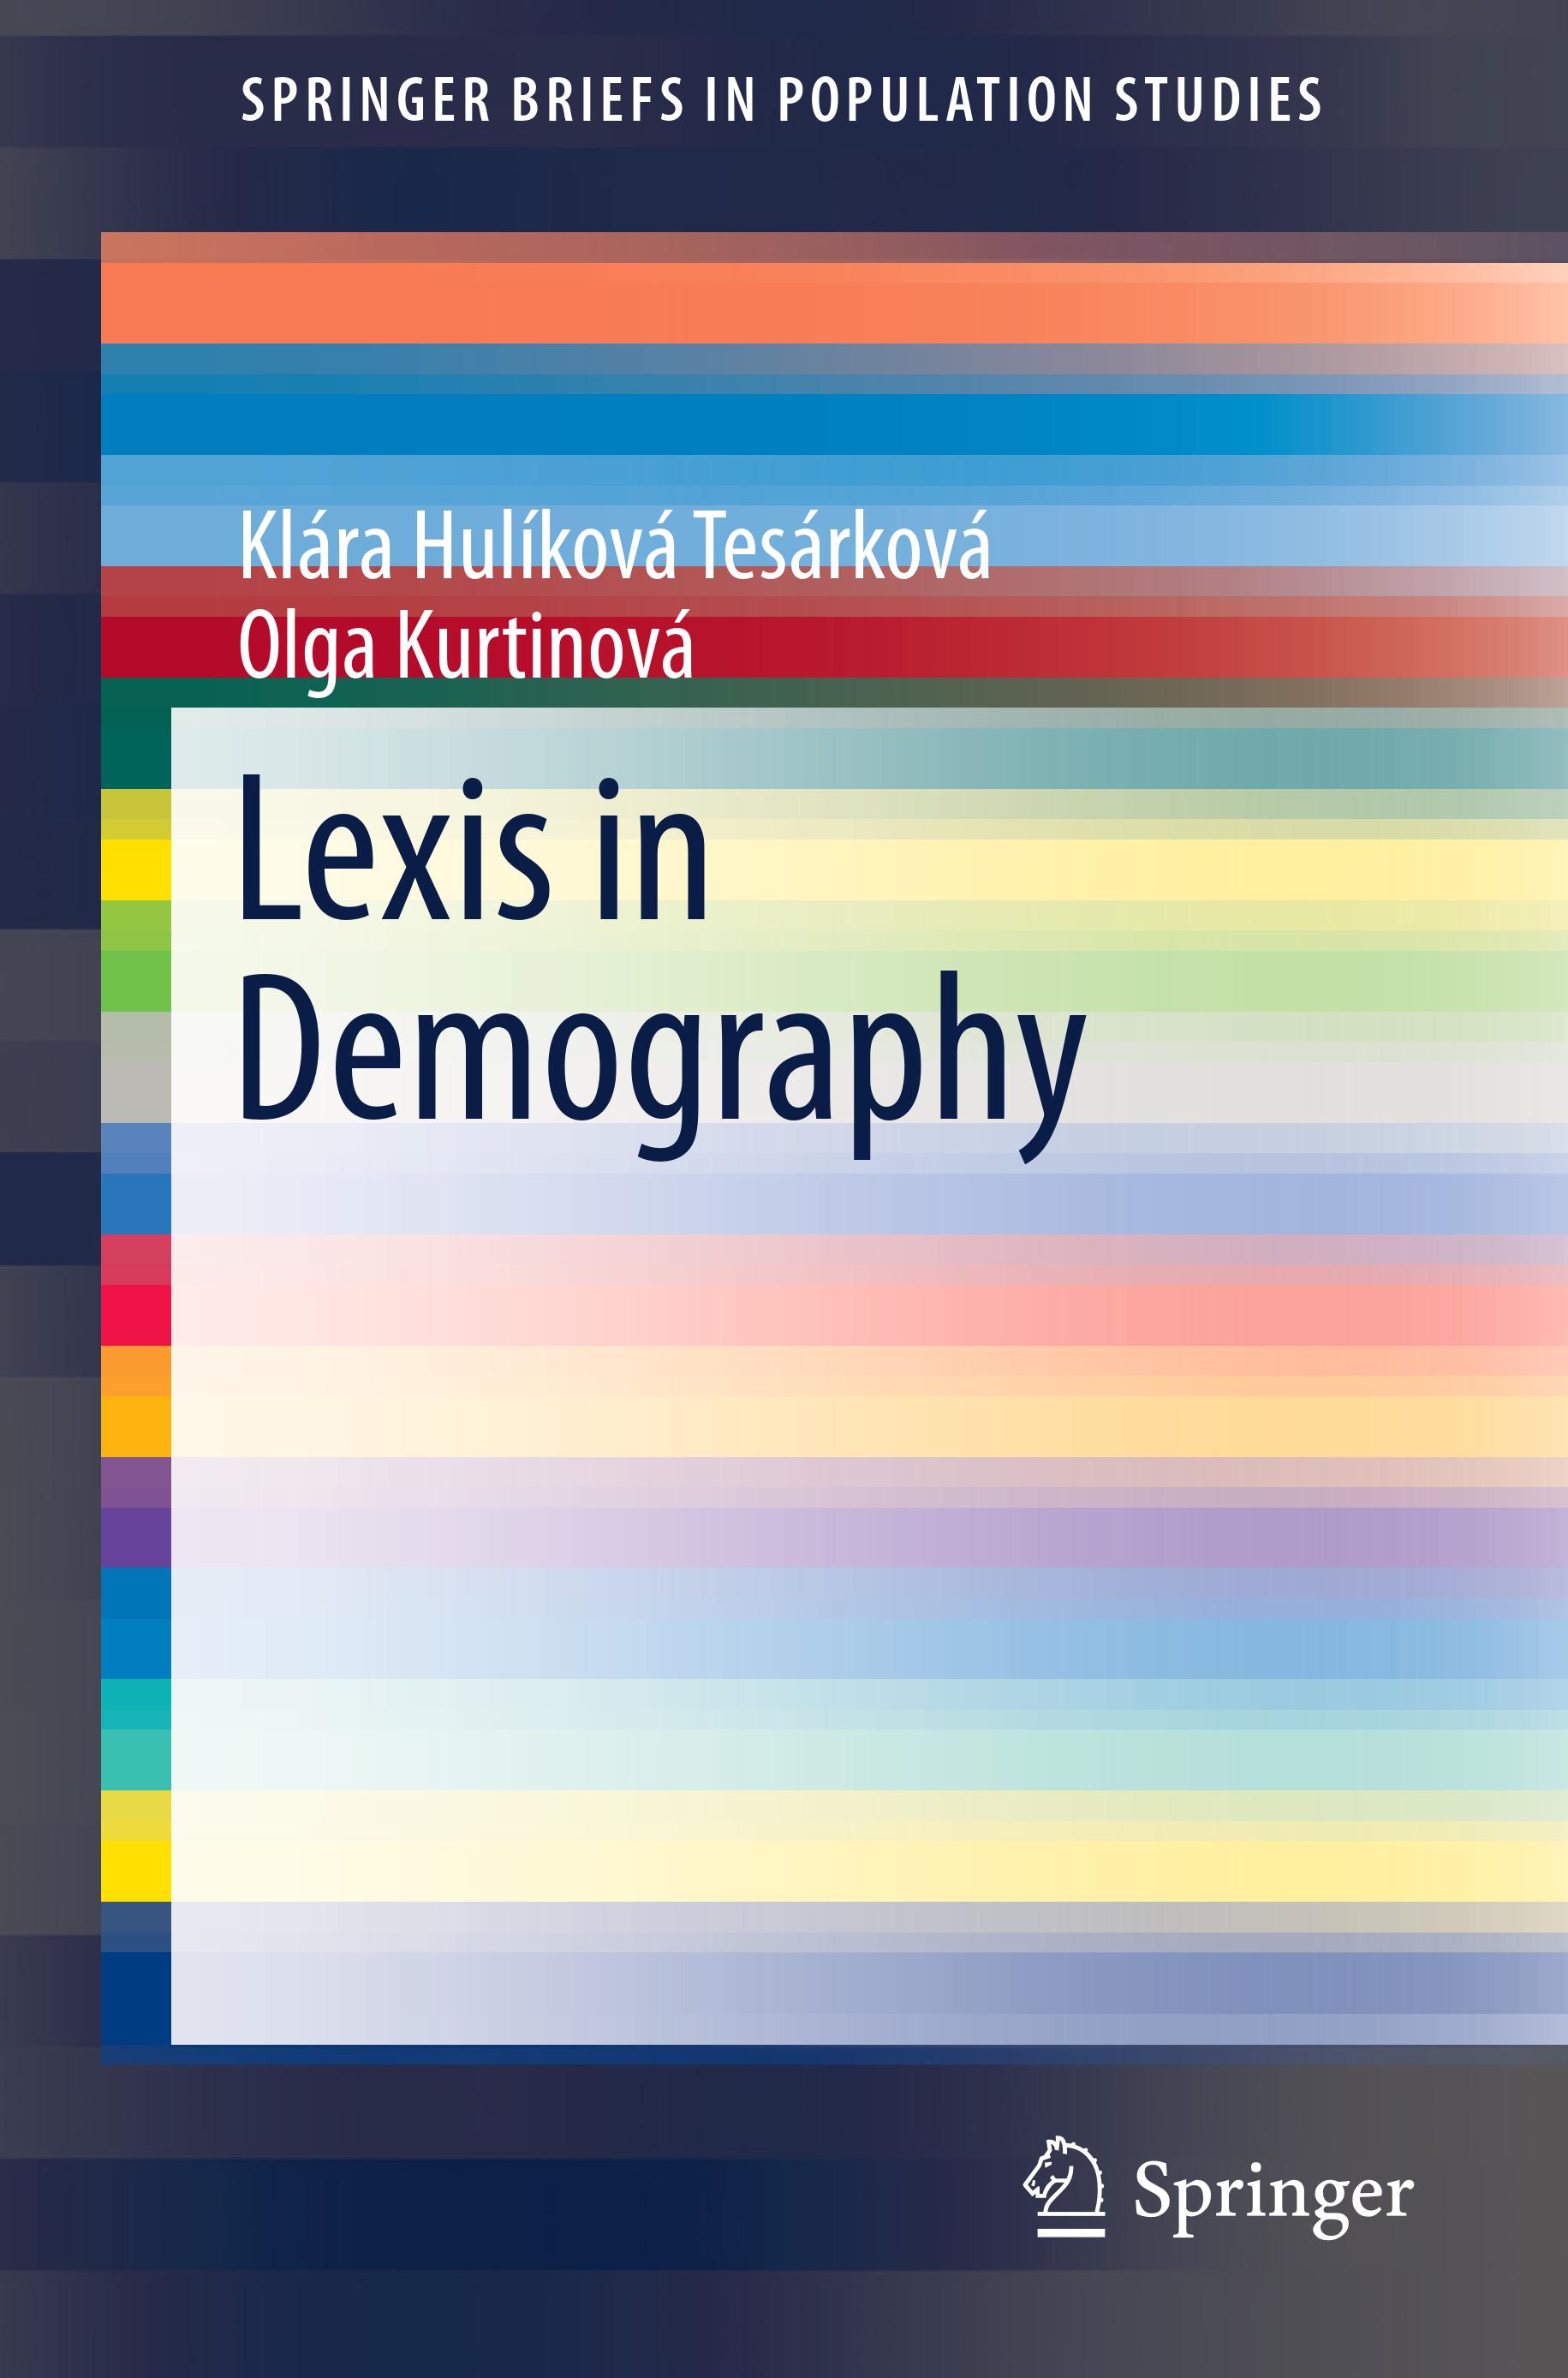 Hot new book Lexis in Demography